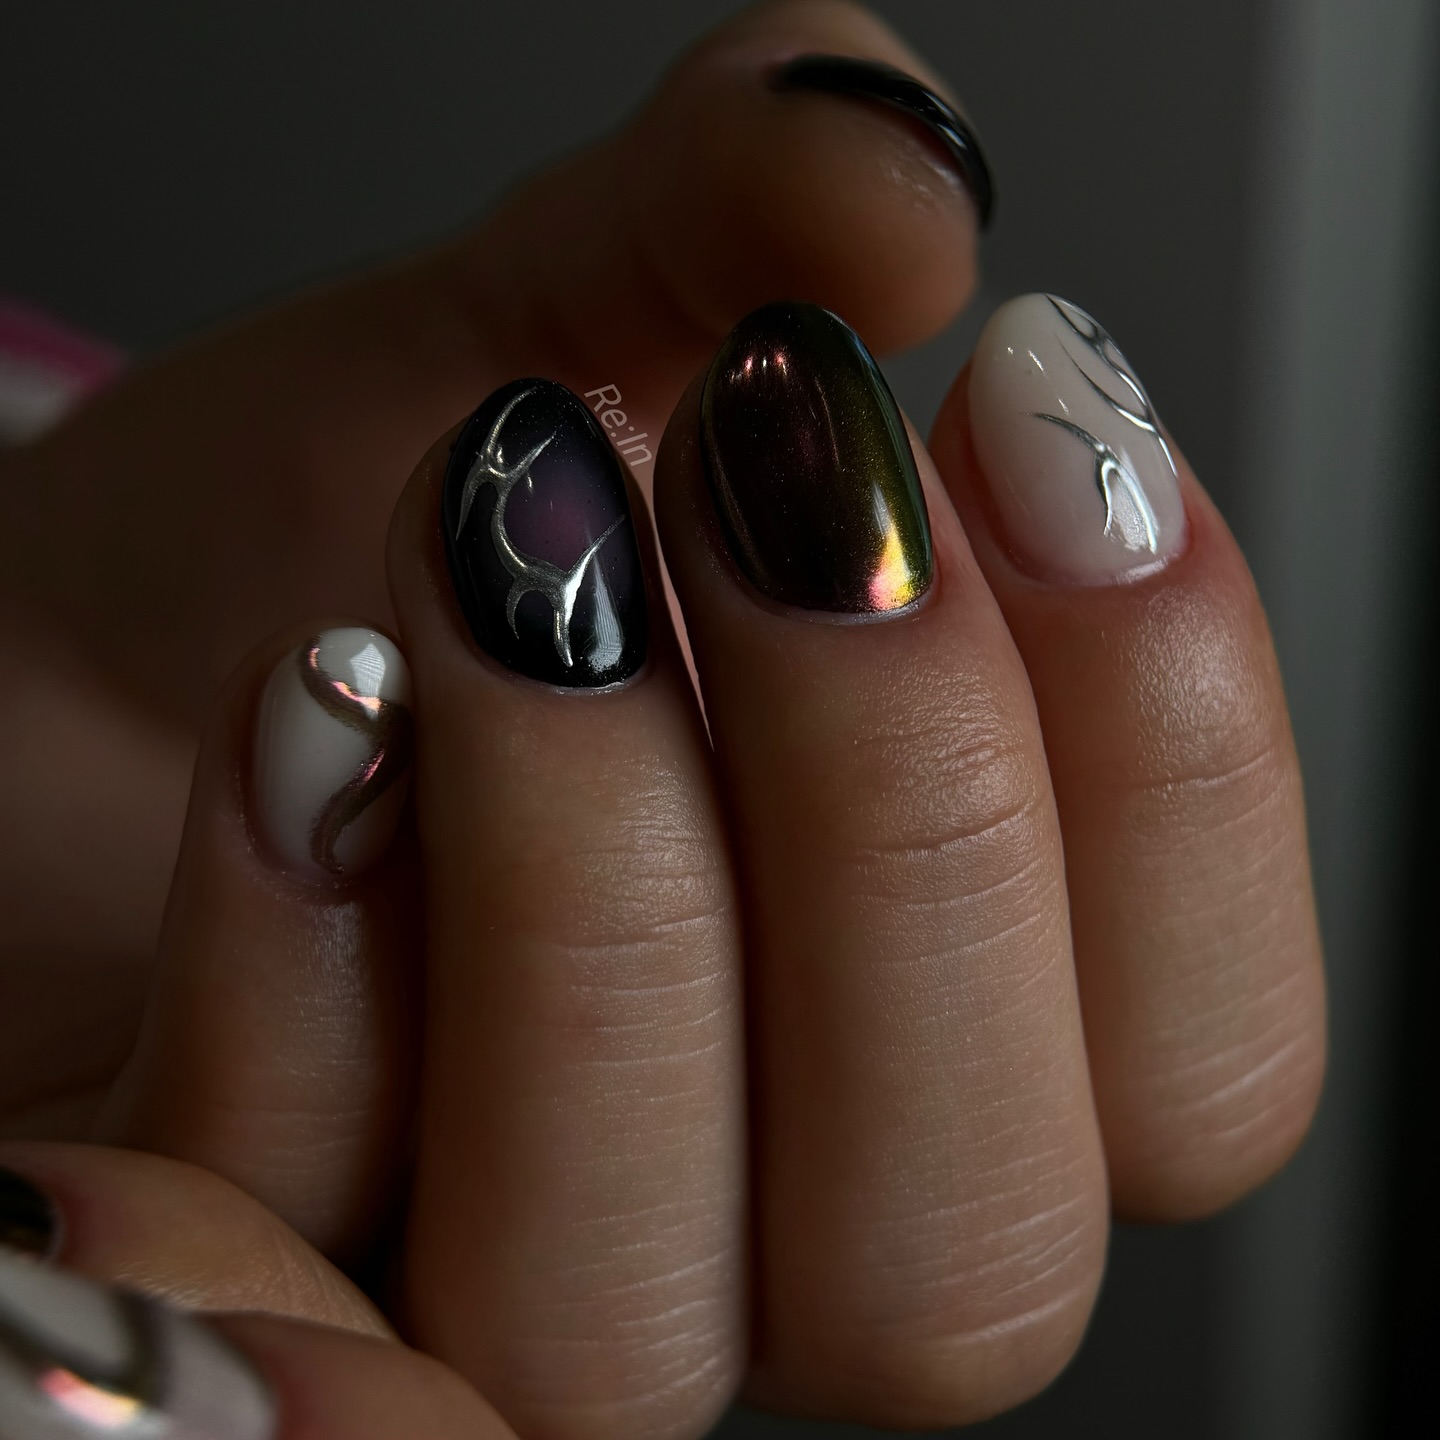 Elegant Chrome and Abstract Art Nail Inspiration